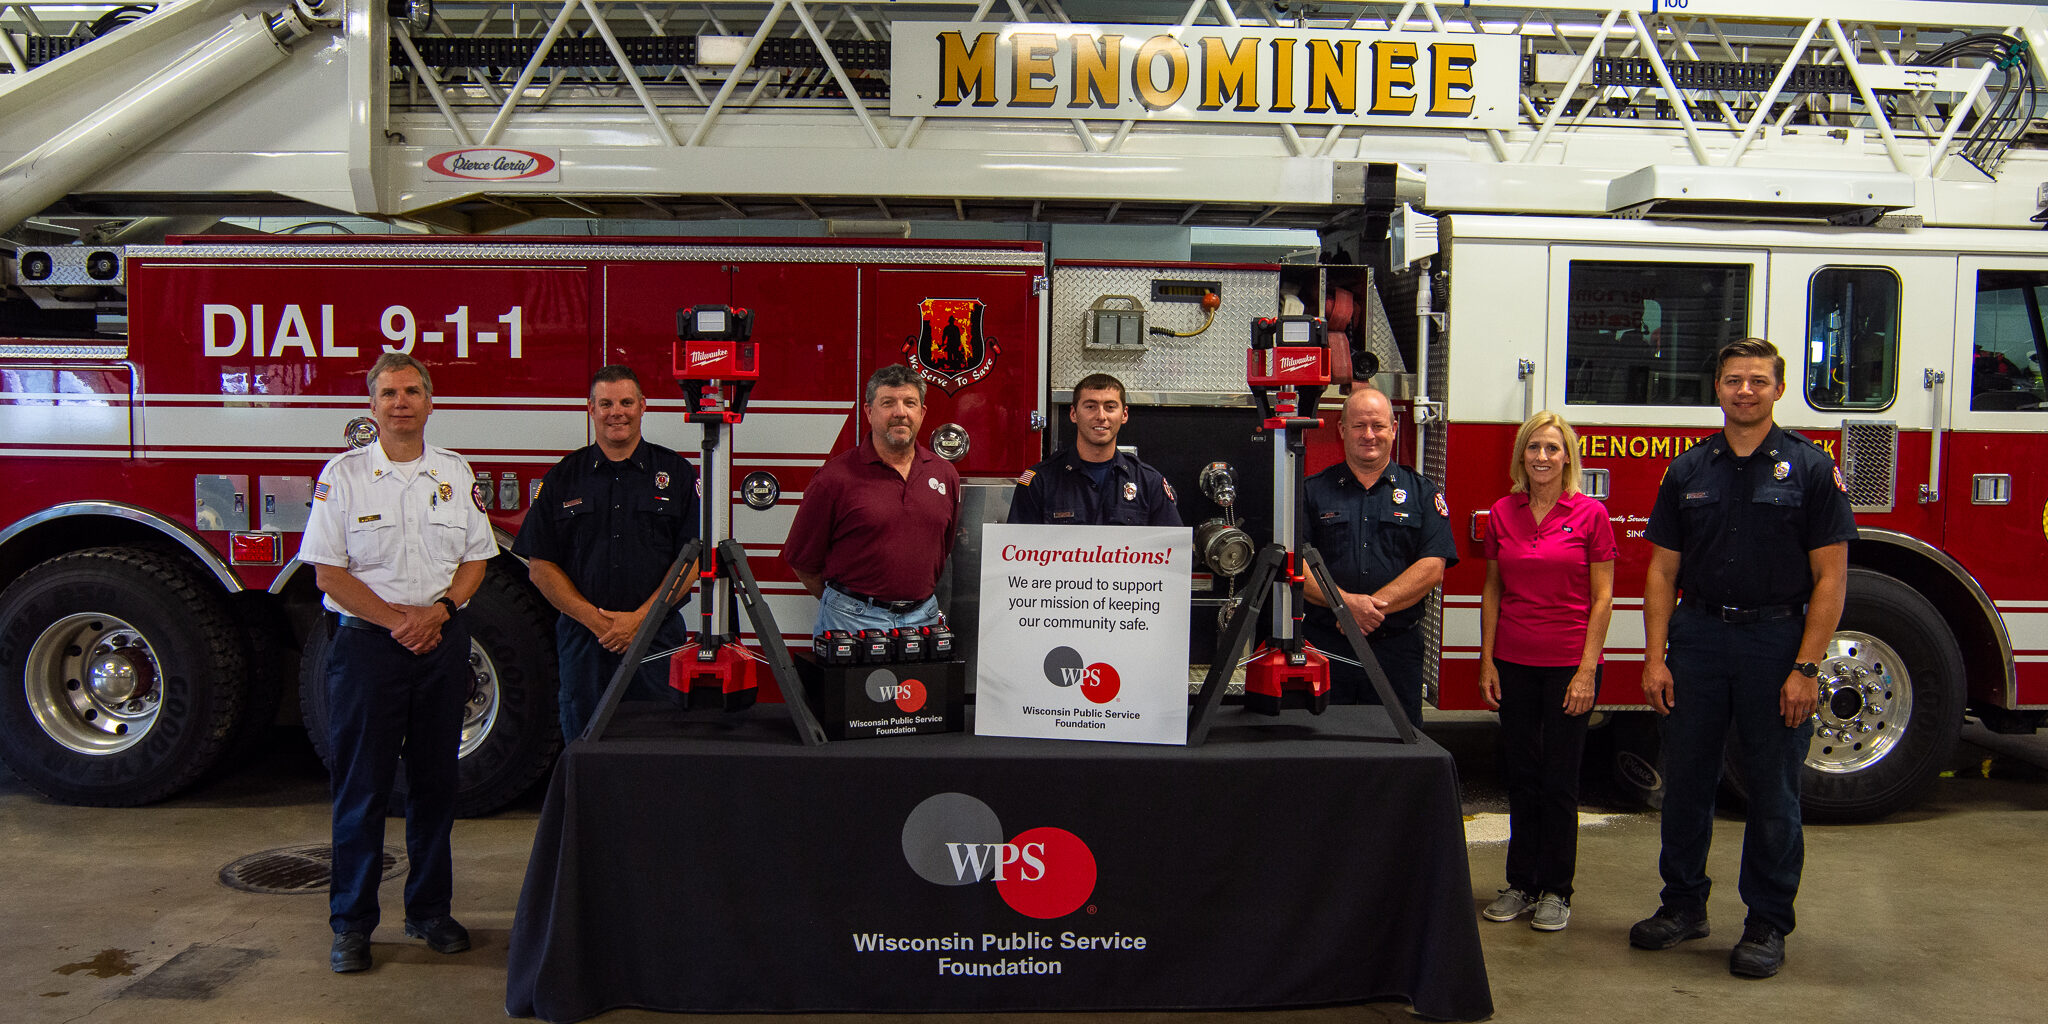 Firefighters and a woman stand behind a table with a WPS Foundation logo on it and new emergency scene lighting equipment resting on the table.